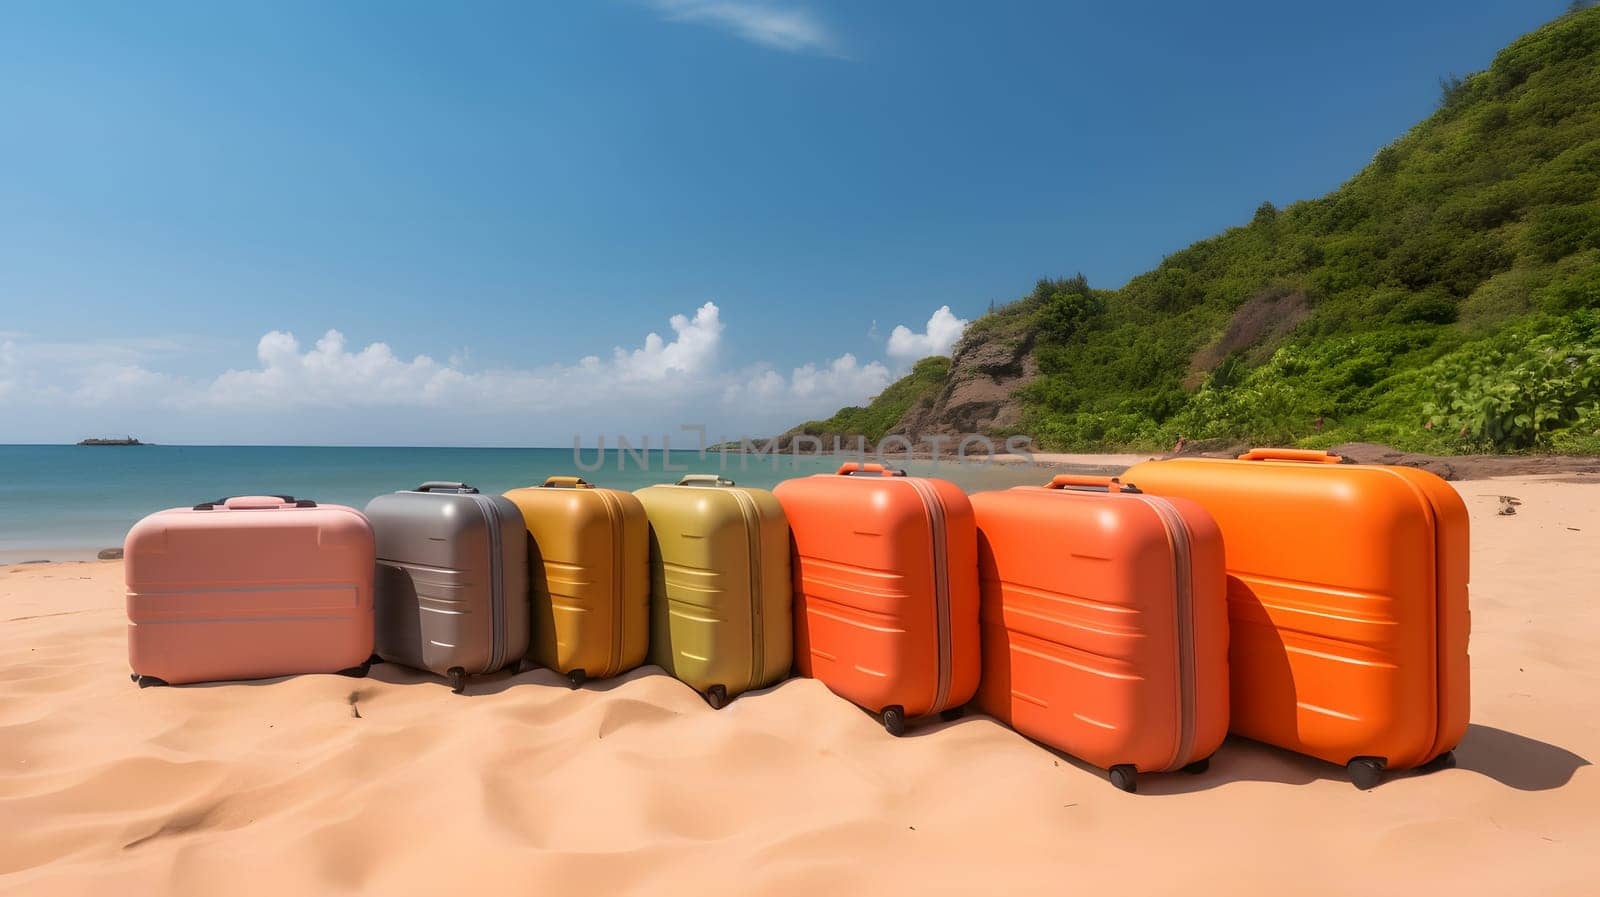 row of modern suitcases on tropical resort beach at sunny day. Neural network generated in May 2023. Not based on any actual person, scene or pattern.